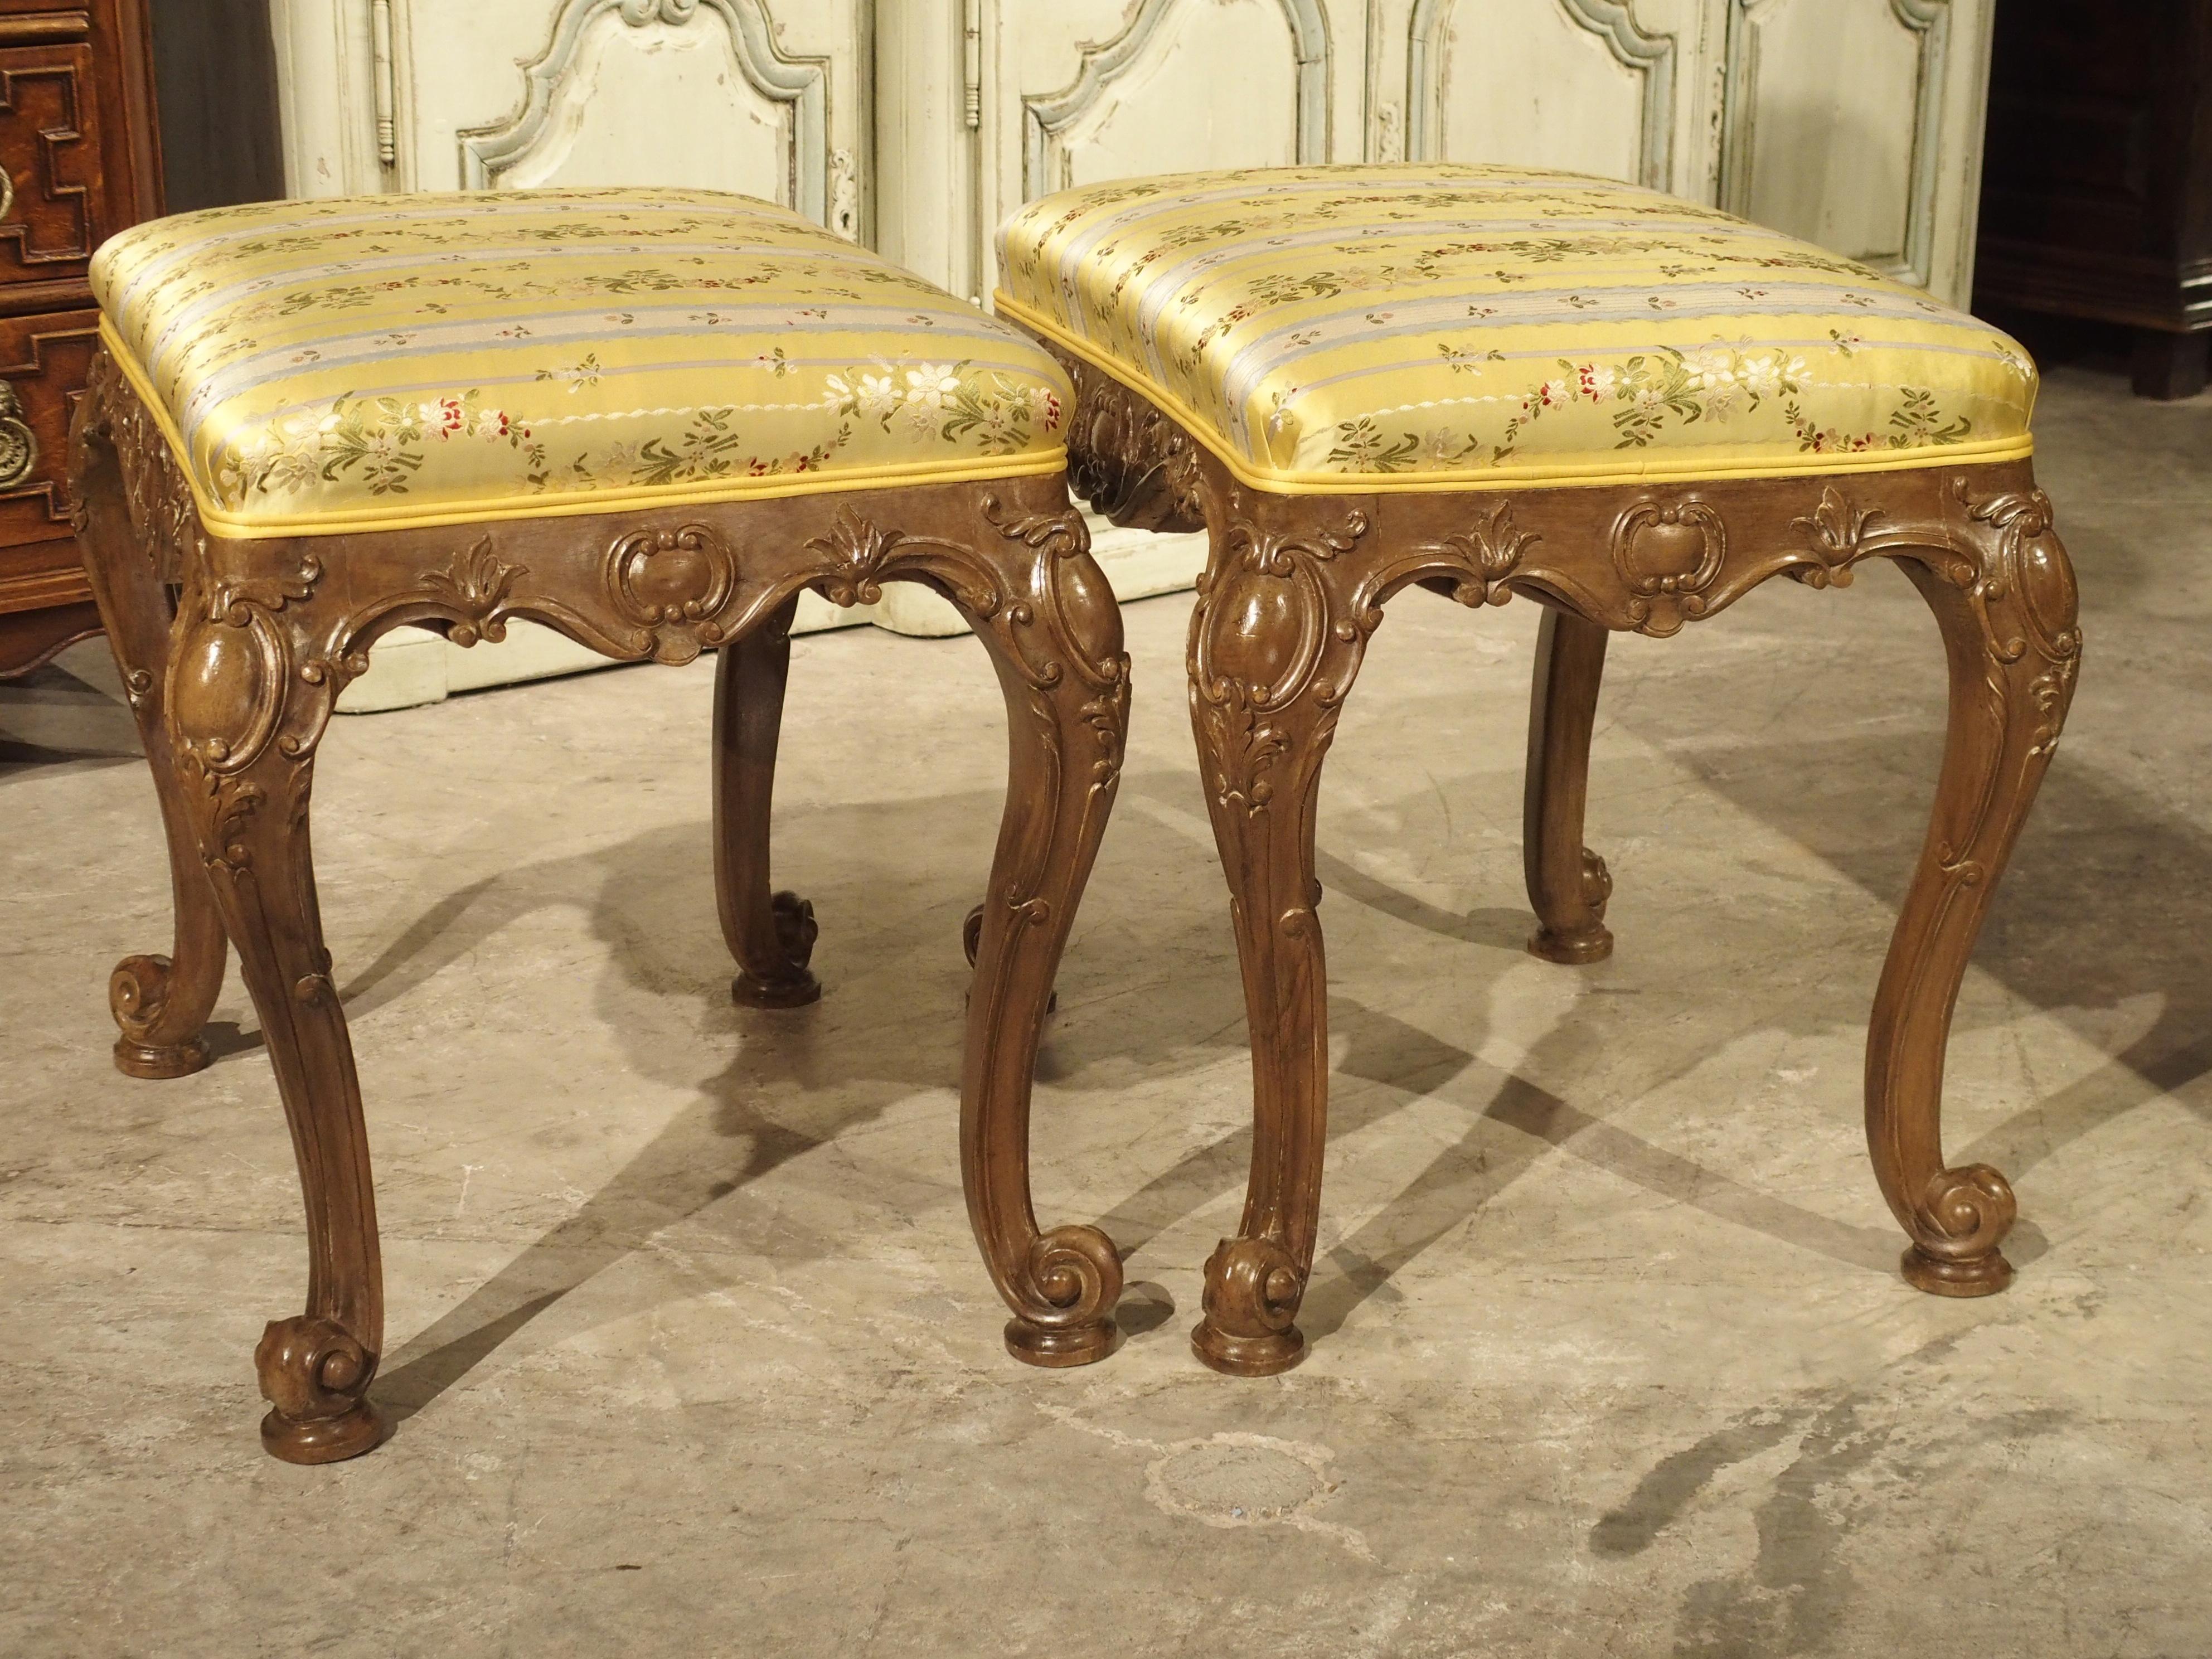 Pair of Well Carved French Louis XV Style Tabouret Stools with Silk Upholstery For Sale 6